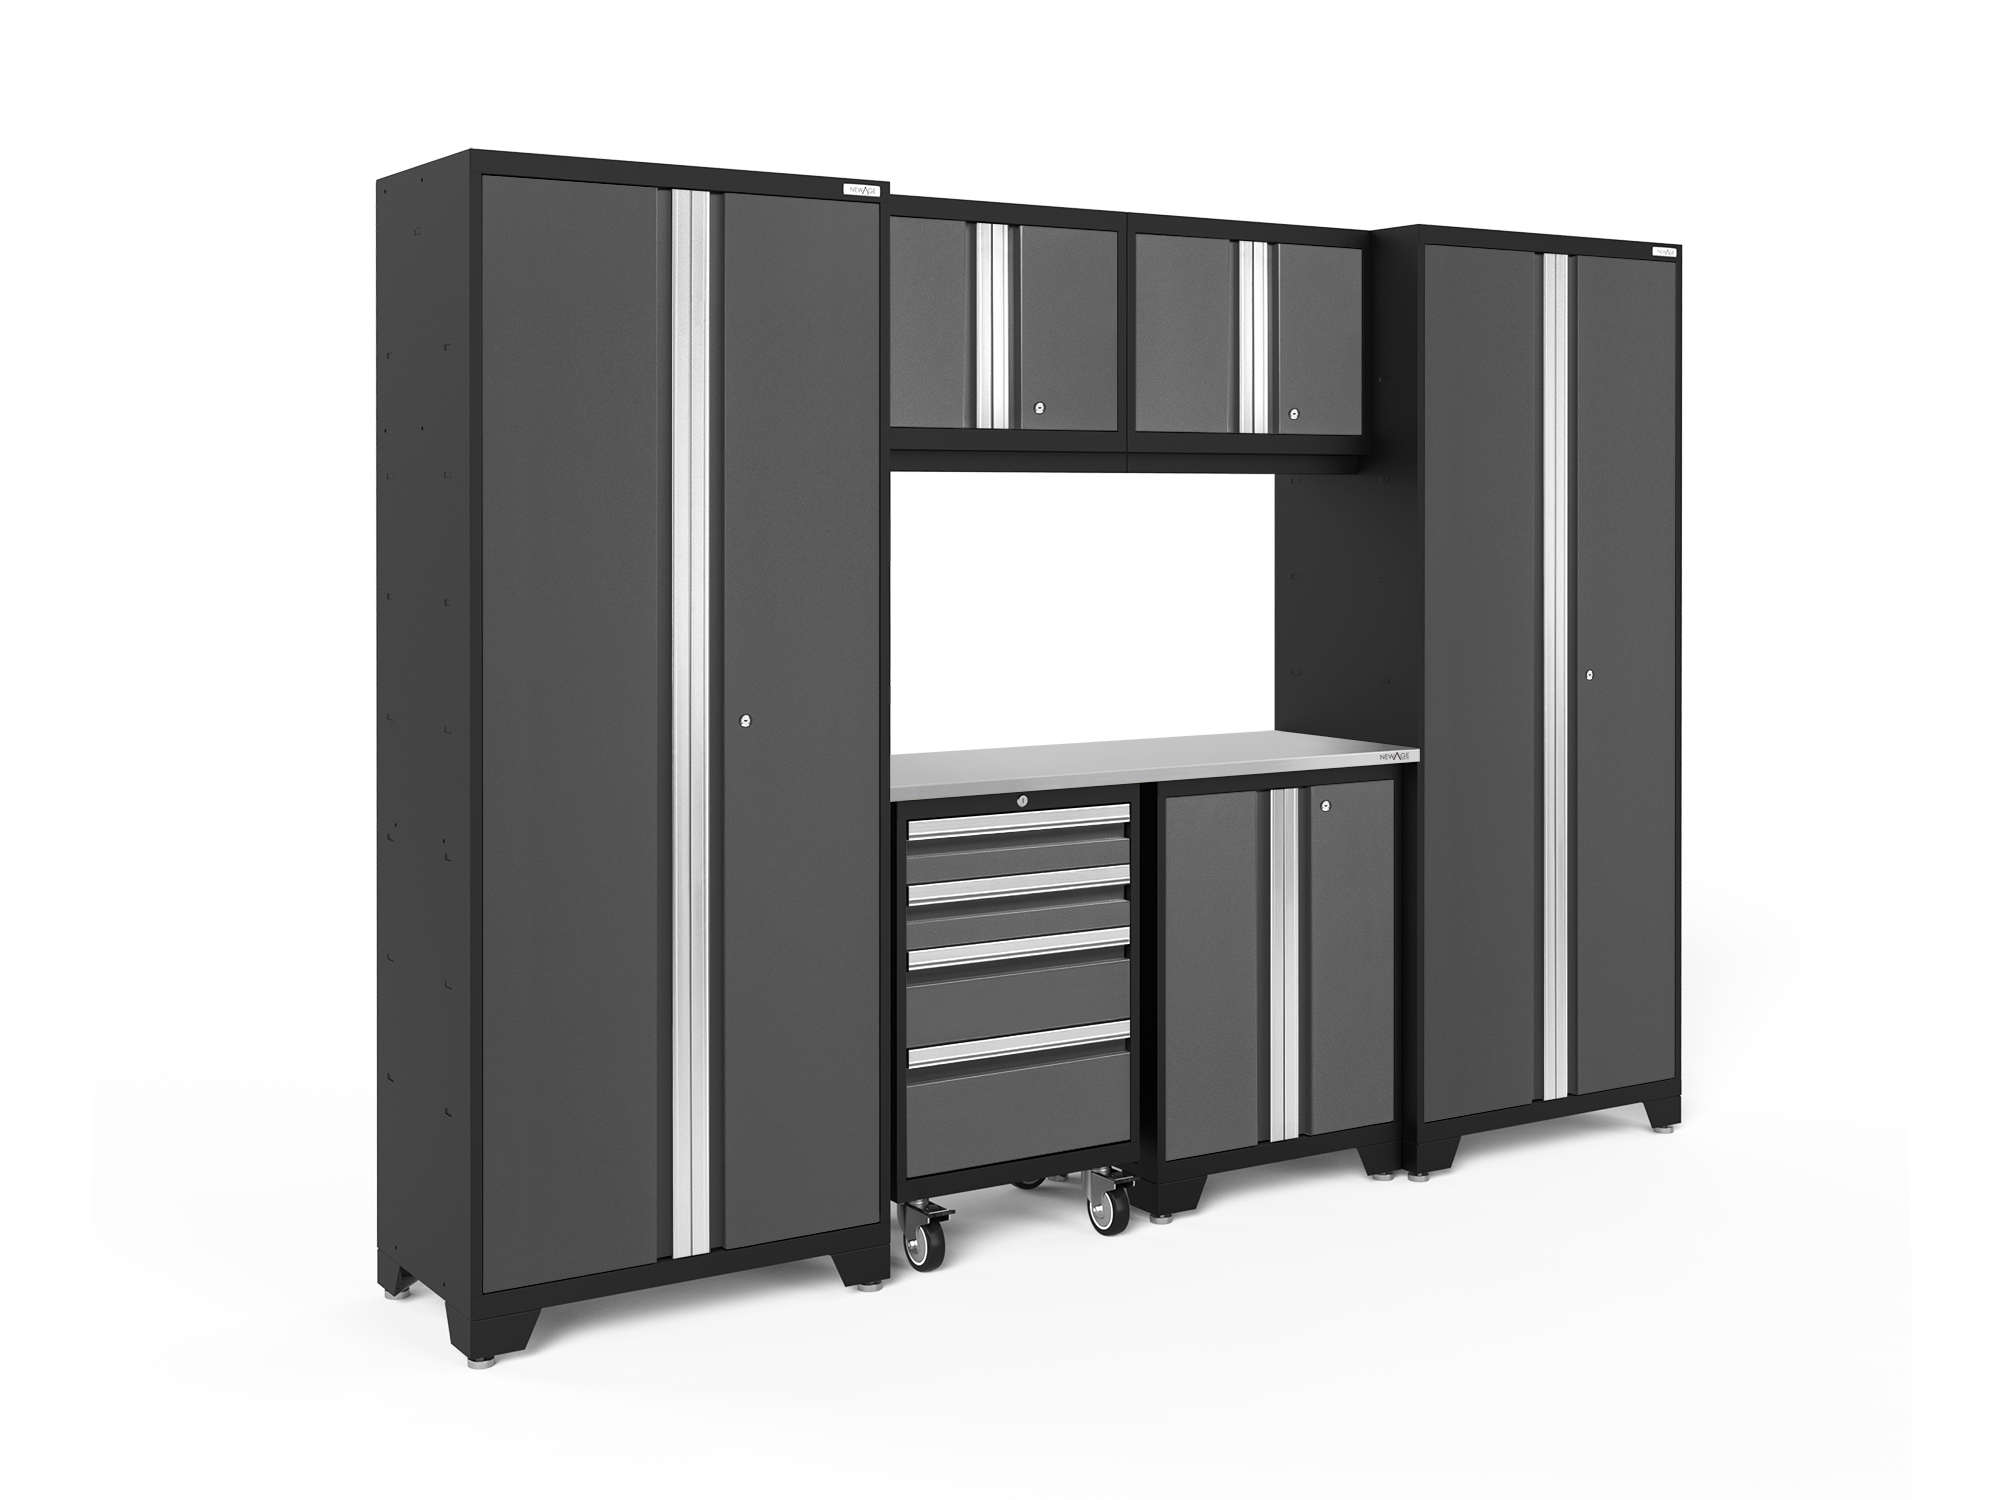 Bold 7 Pc Cabinet Set: Tool, Wall Cabinets, 30 in. Lockers